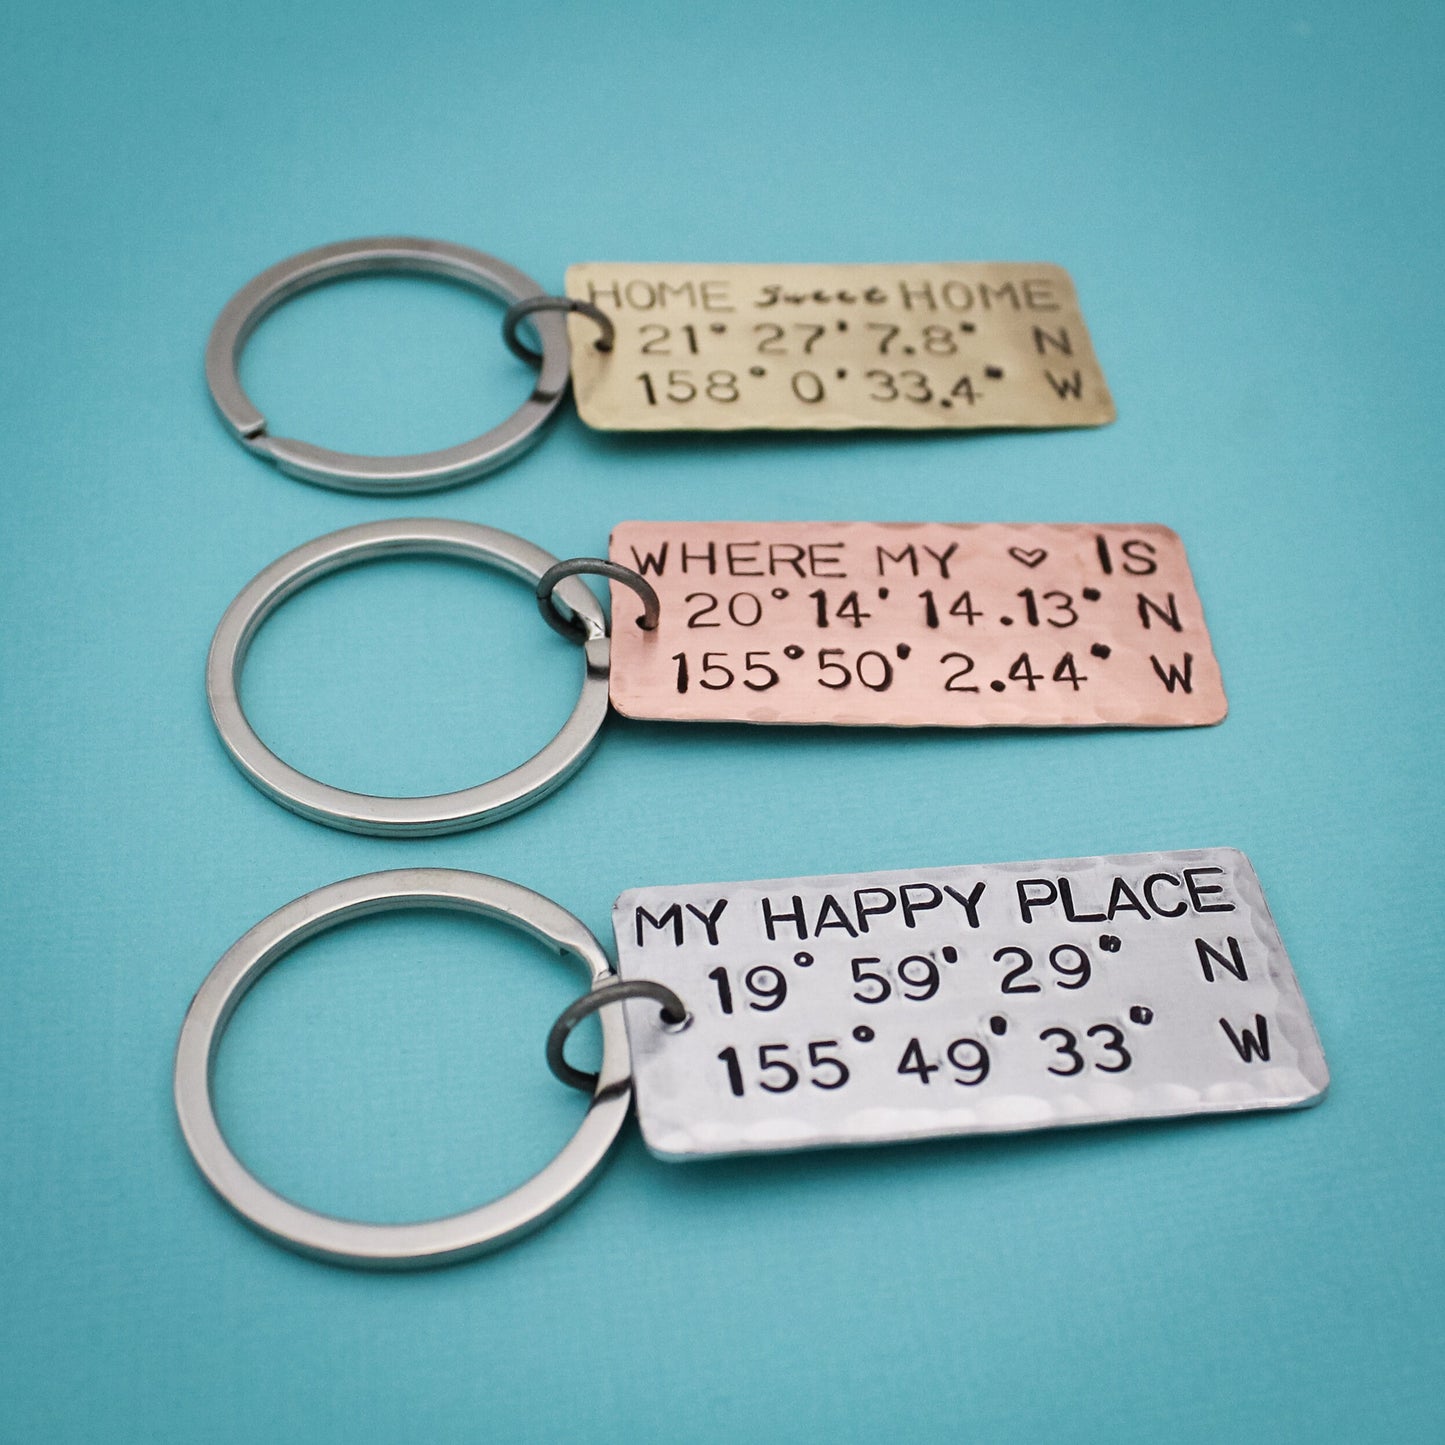 My Happy Place Latitude & Longitude Key Chain, Coordinates Keychain, Where My Heart Is Keychain, Home Sweet Home, Hand Stamped Personalized